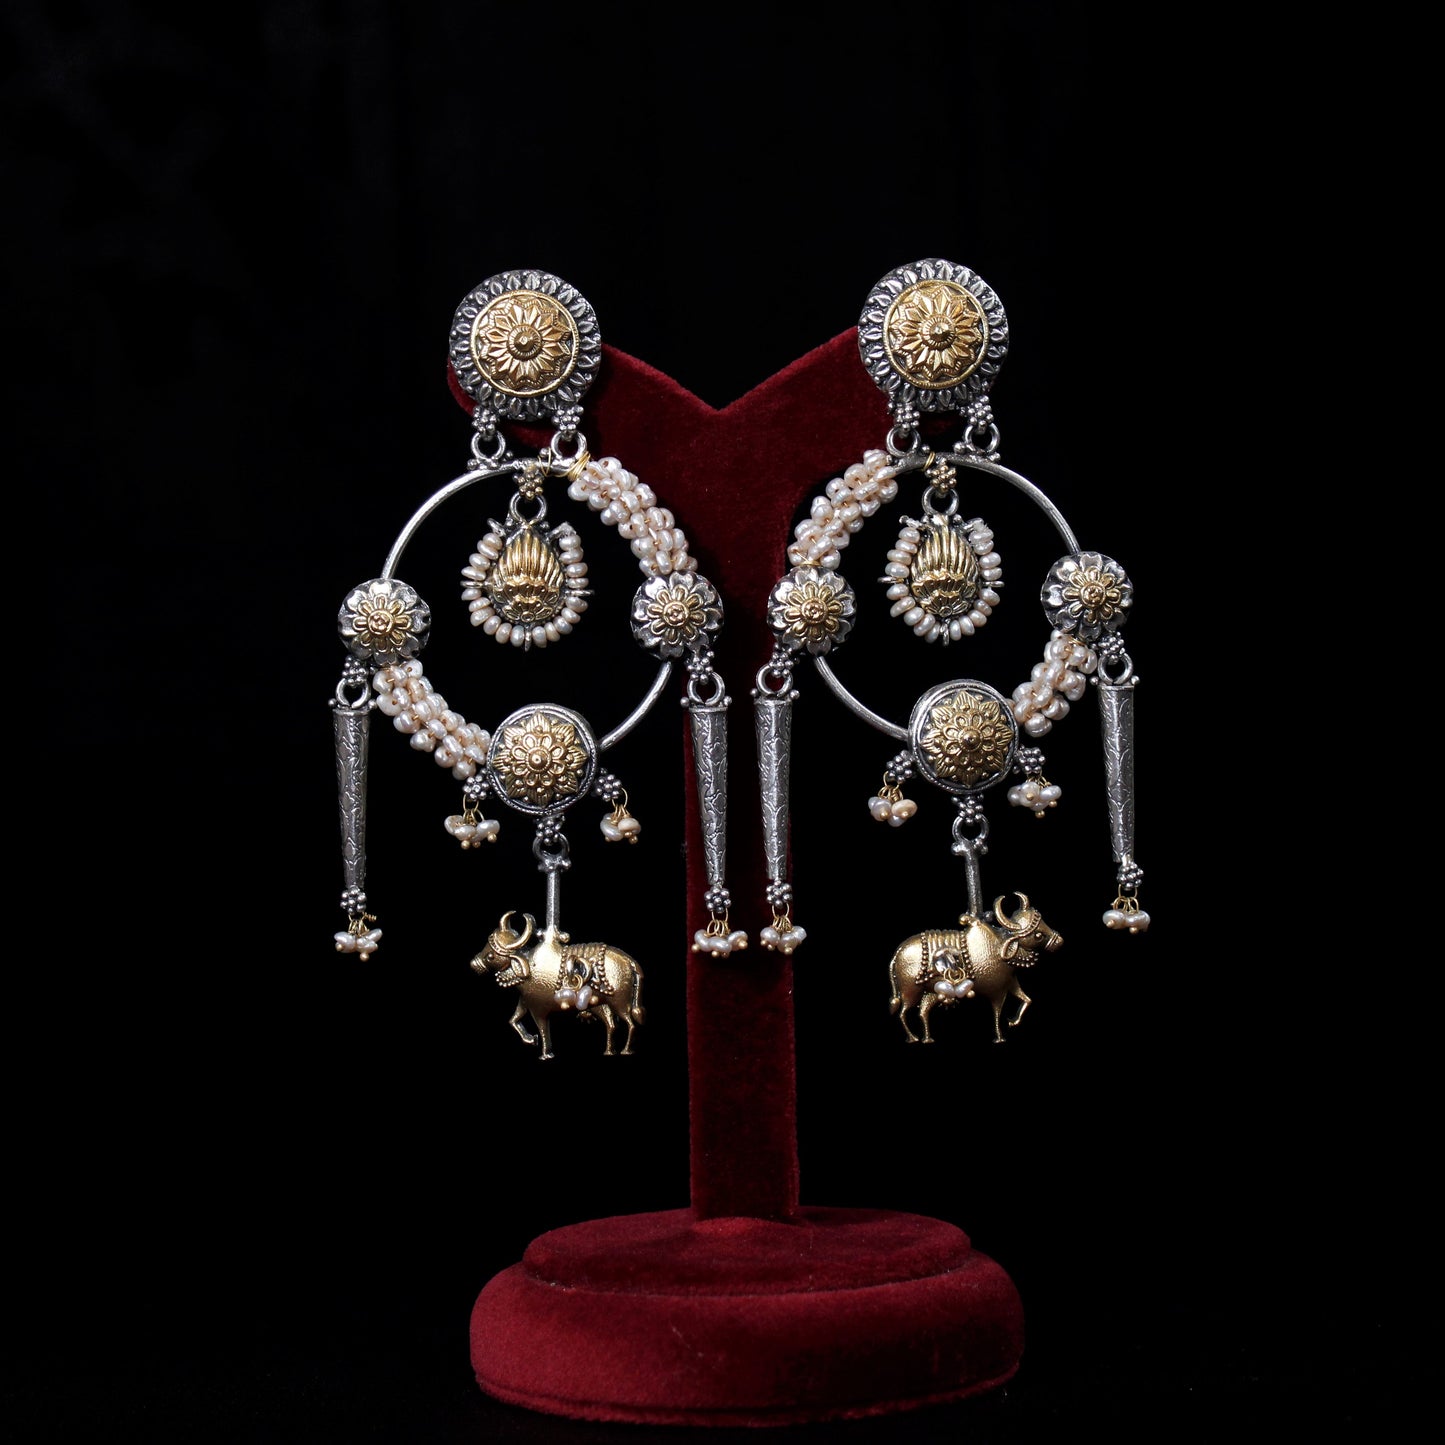 TWO-toned EARRINGS :- 92.5 STERLING SILVER GOLD PLATED WITH FRESH WATER PEARLS.